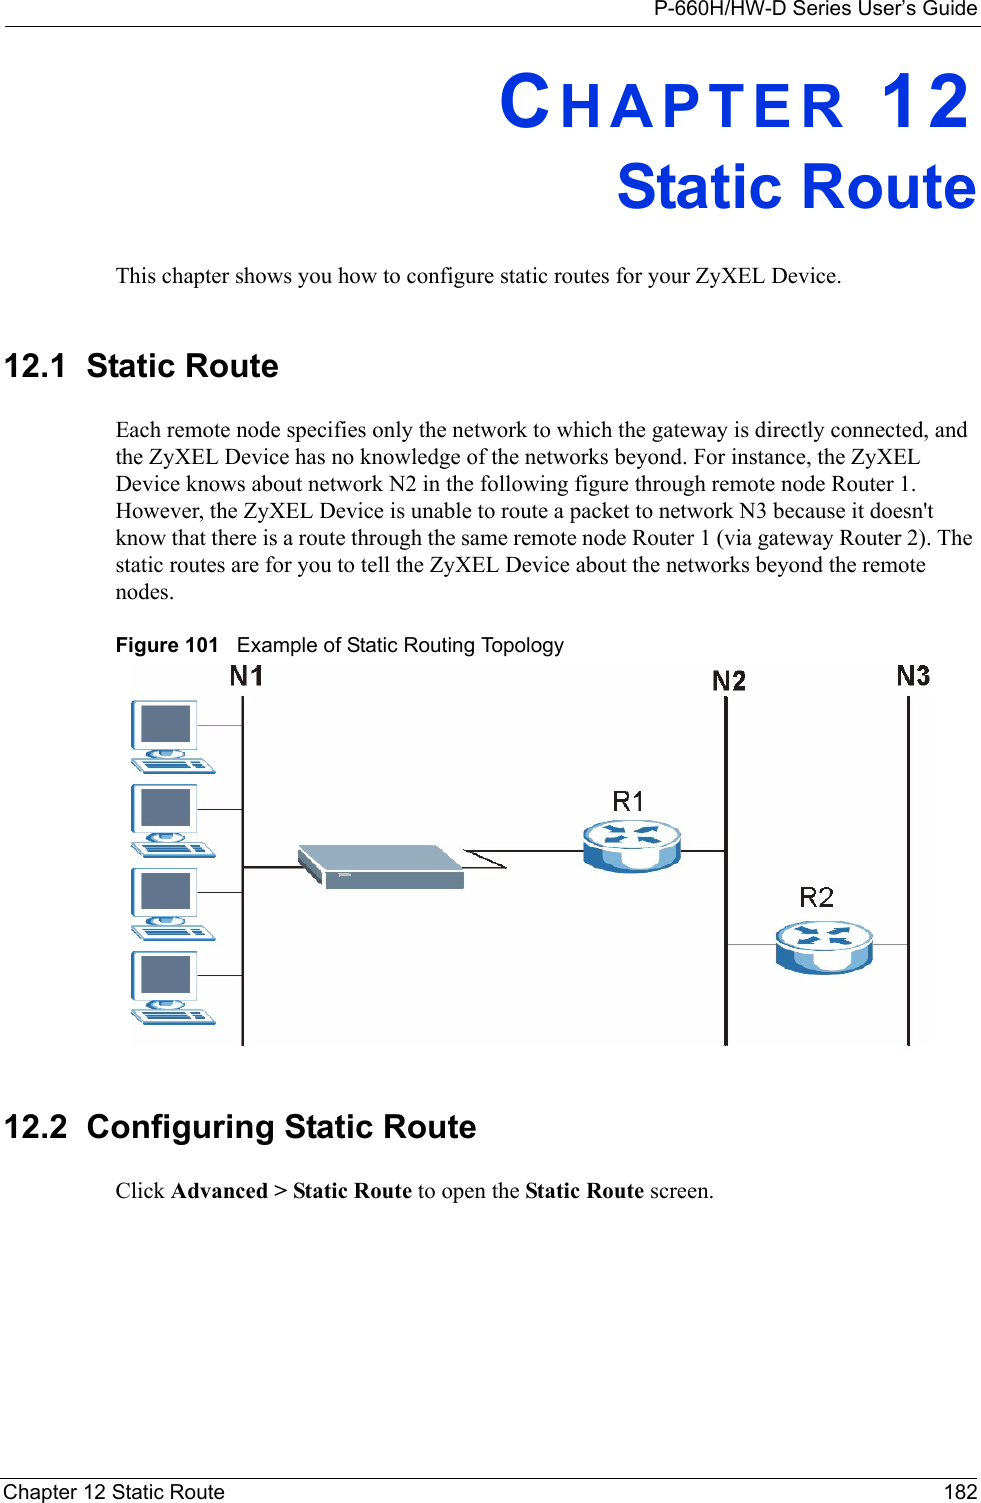 P-660H/HW-D Series User’s GuideChapter 12 Static Route 182CHAPTER 12Static RouteThis chapter shows you how to configure static routes for your ZyXEL Device.12.1  Static Route   Each remote node specifies only the network to which the gateway is directly connected, and the ZyXEL Device has no knowledge of the networks beyond. For instance, the ZyXEL Device knows about network N2 in the following figure through remote node Router 1. However, the ZyXEL Device is unable to route a packet to network N3 because it doesn&apos;t know that there is a route through the same remote node Router 1 (via gateway Router 2). The static routes are for you to tell the ZyXEL Device about the networks beyond the remote nodes.Figure 101   Example of Static Routing Topology12.2  Configuring Static Route Click Advanced &gt; Static Route to open the Static Route screen. 